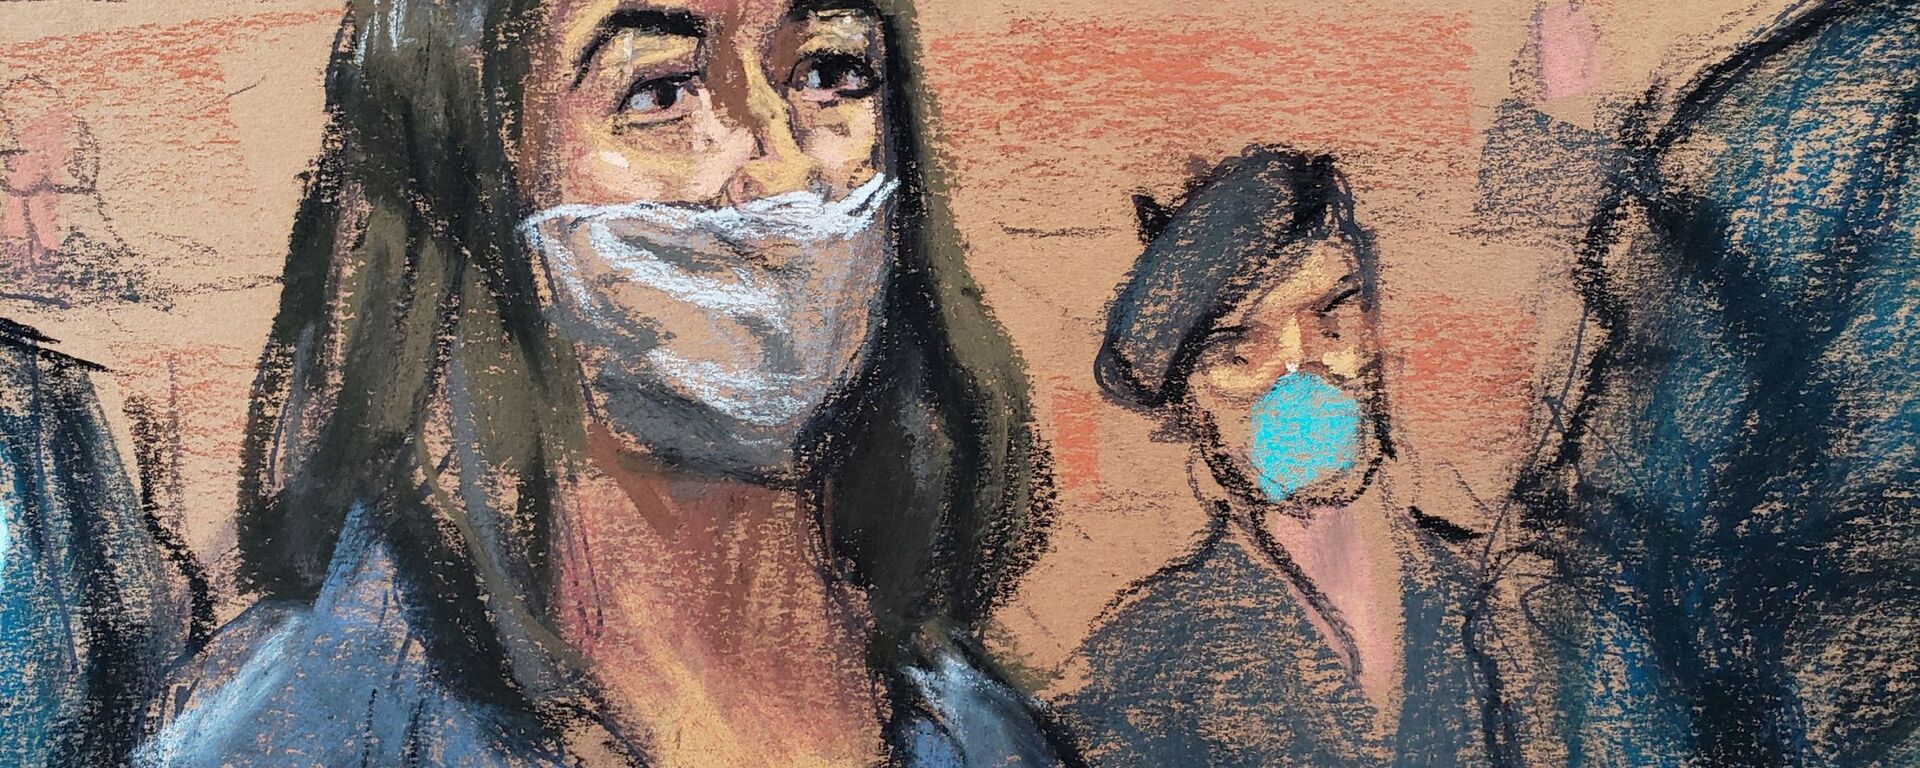 British socialite Ghislaine Maxwell appears during her arraignment hearing on a new indictment at Manhattan Federal Court in New York City, New York, U.S. April 23, 2021, in this courtroom sketch.  - Sputnik International, 1920, 02.04.2022